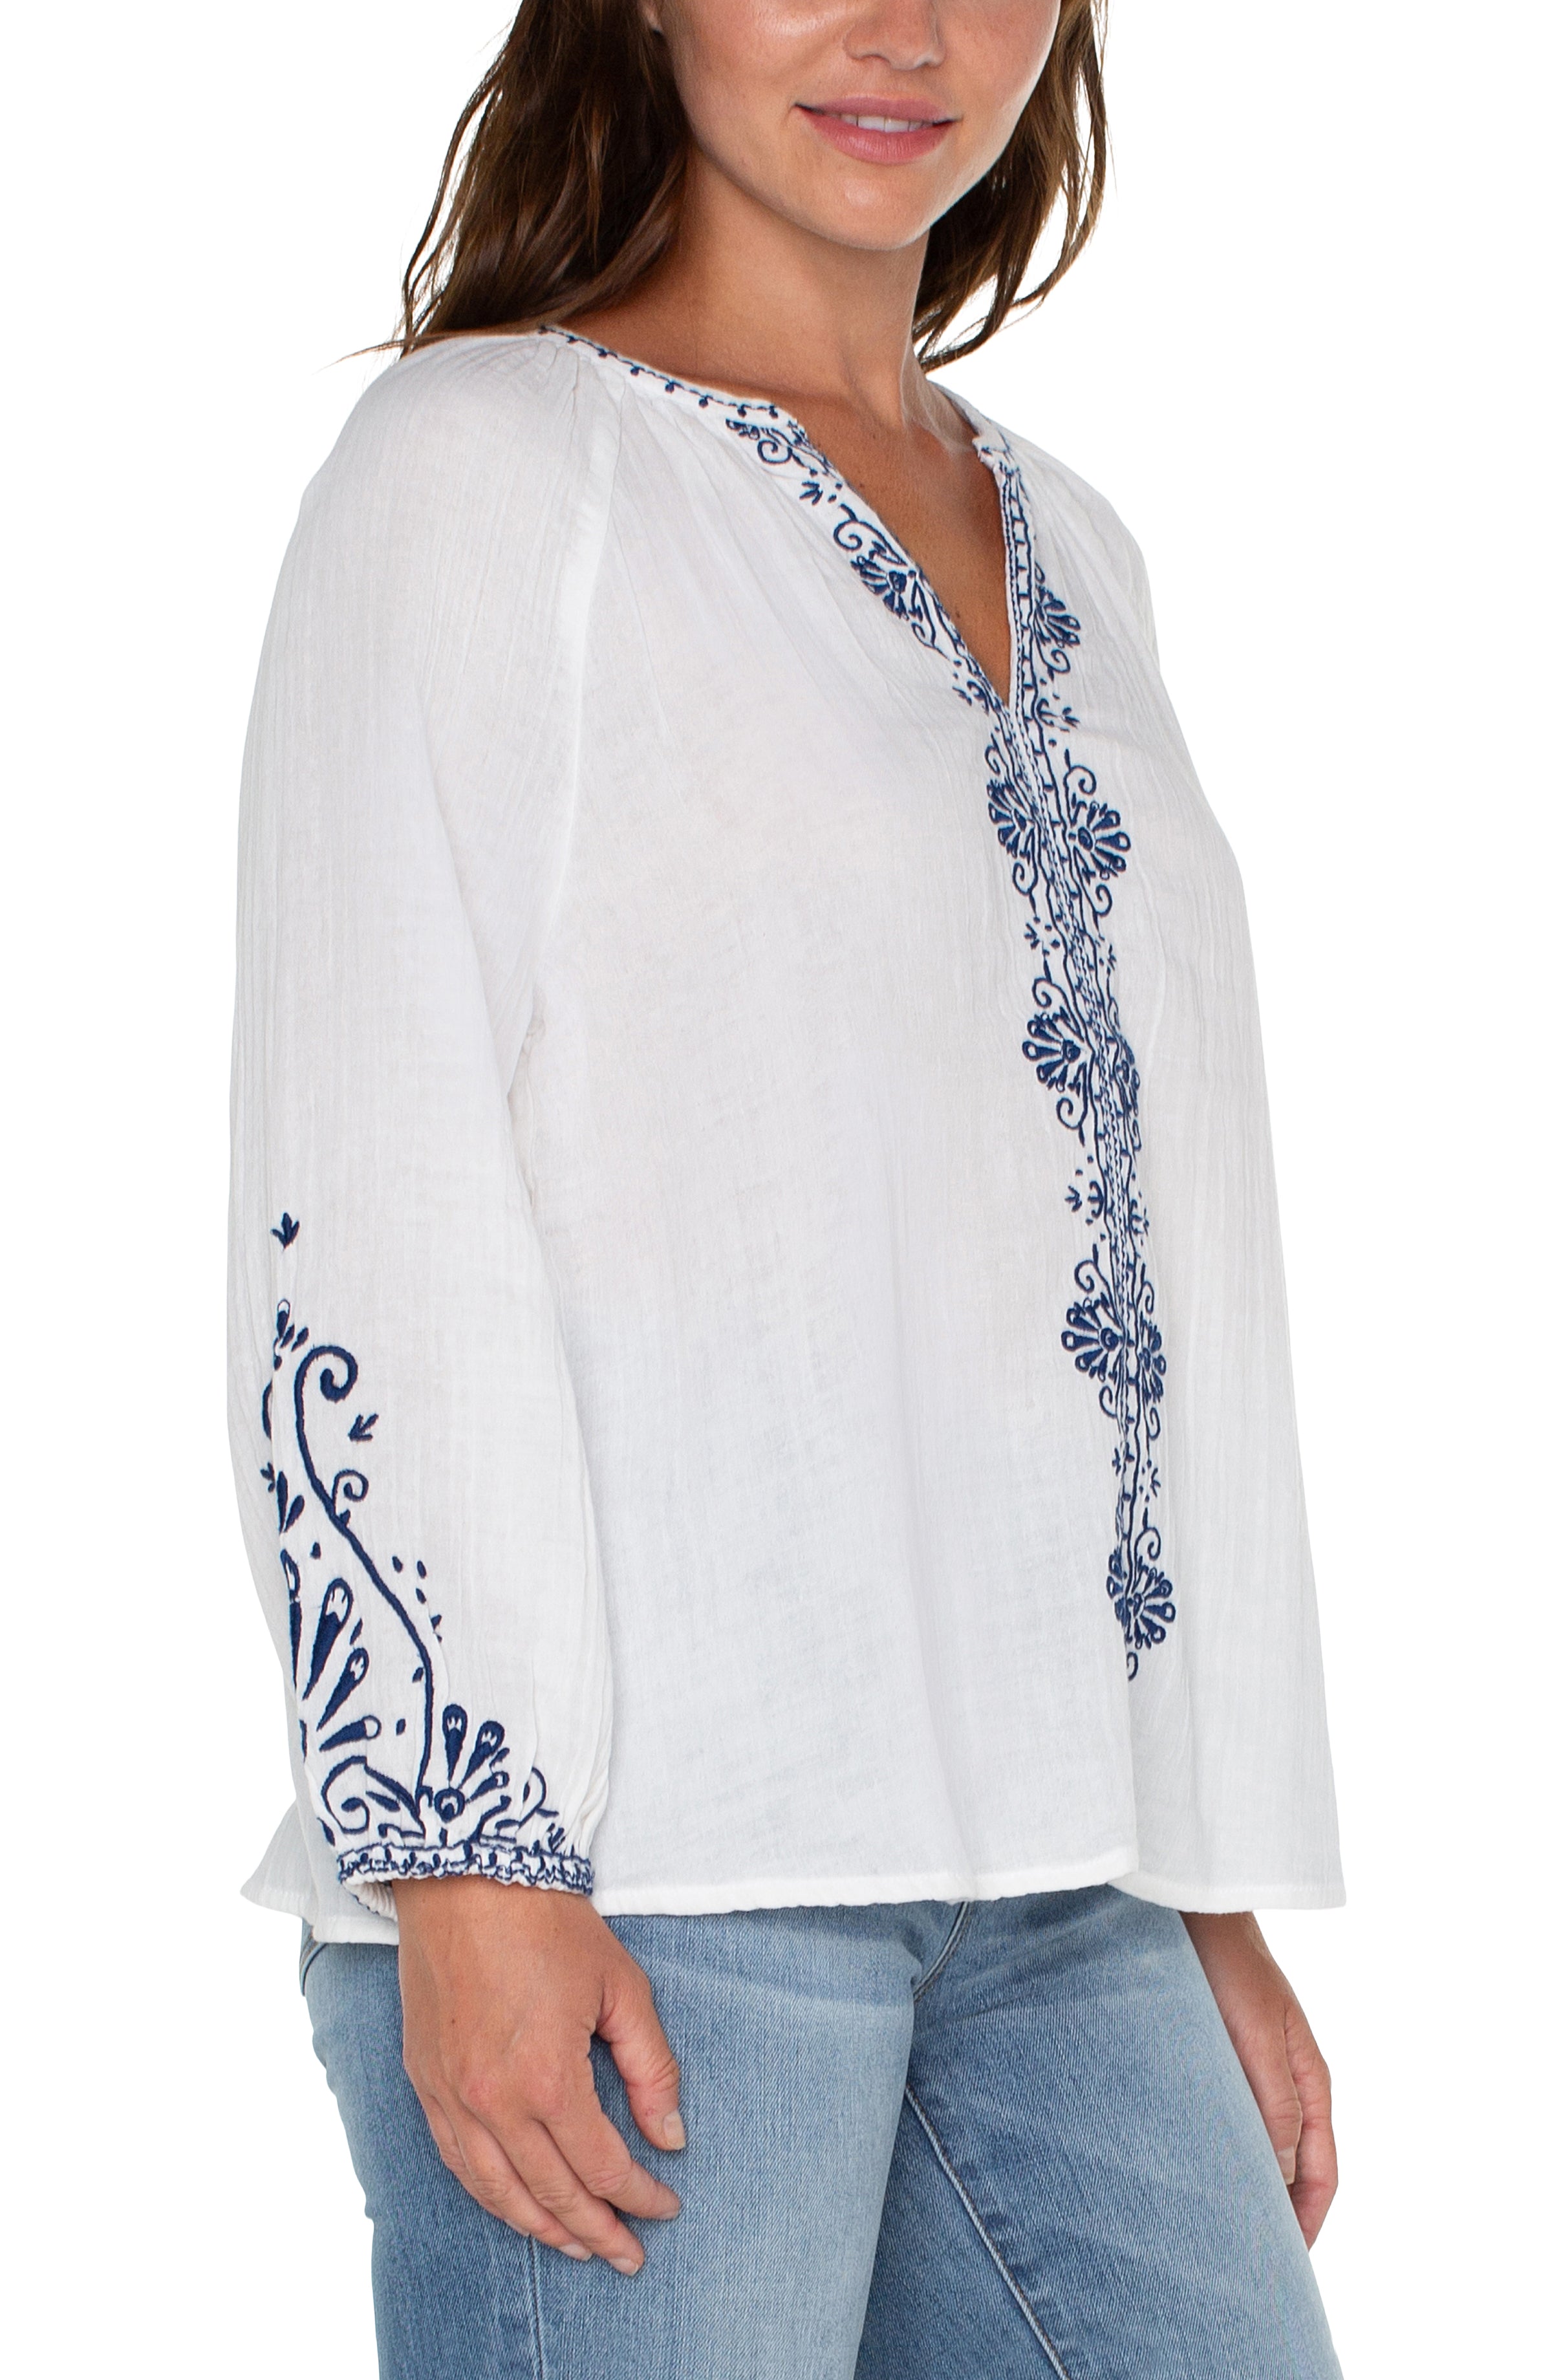 LPLA Embroidered Blouse